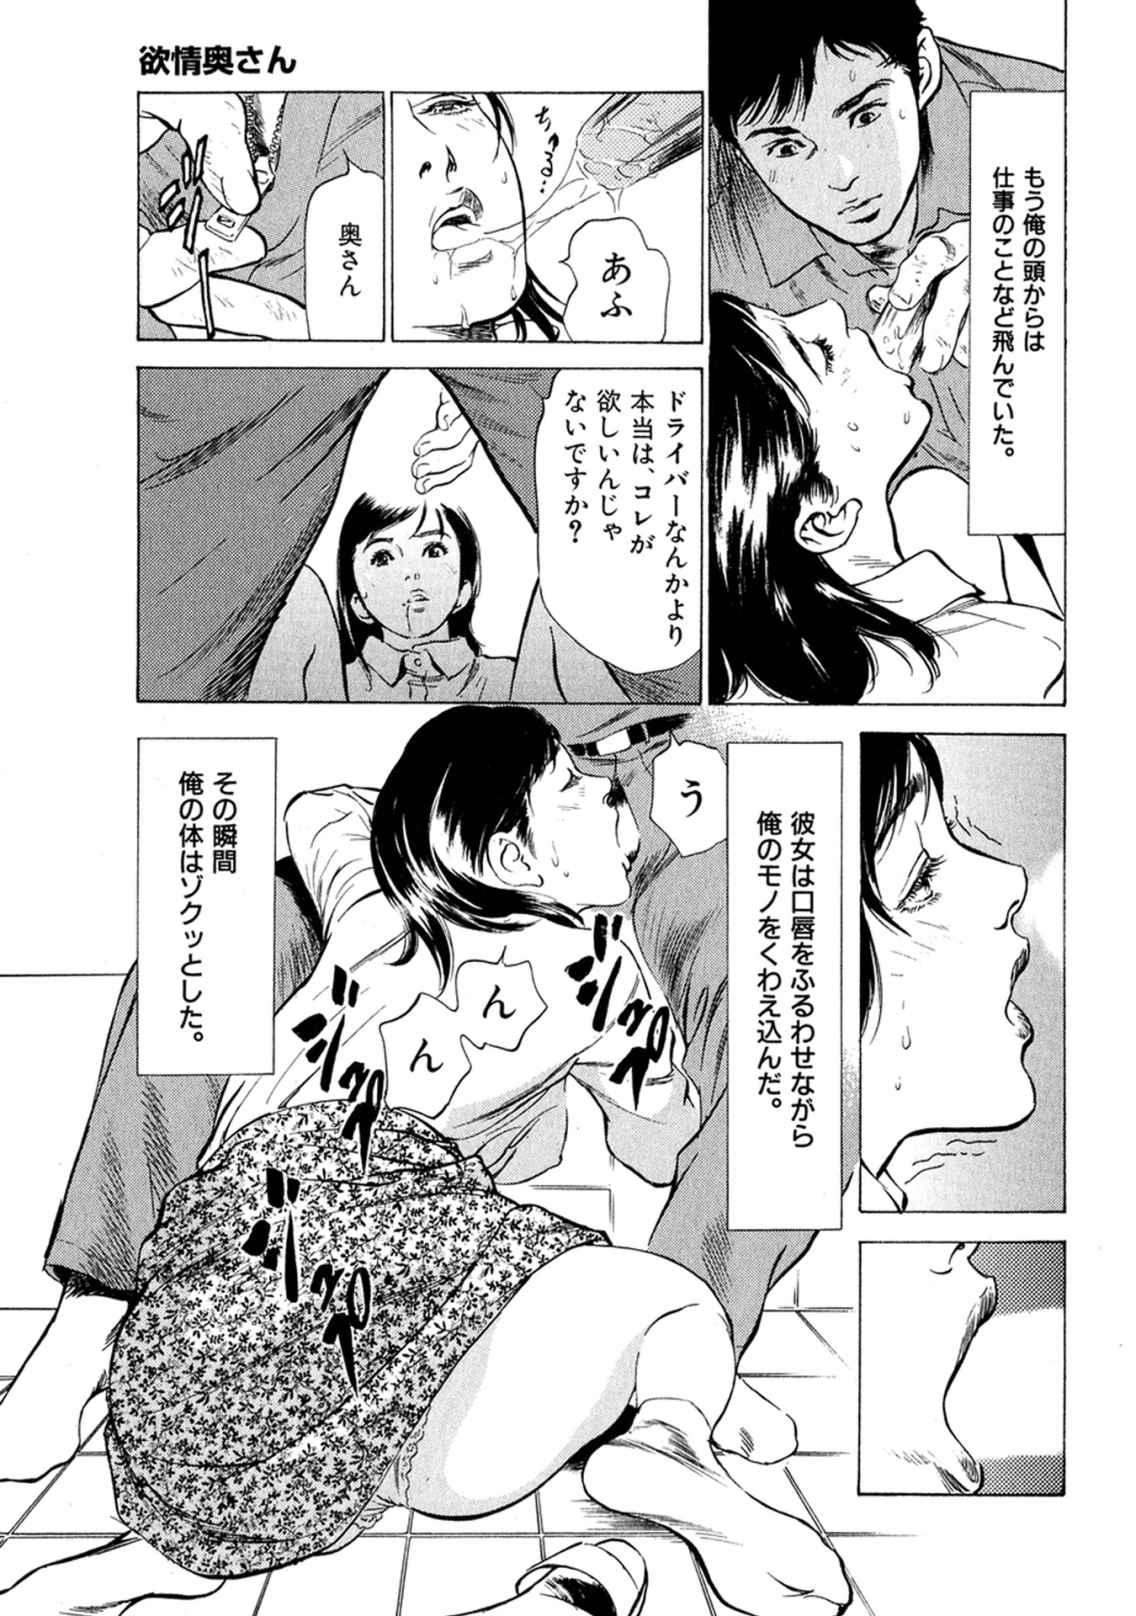 Unshaved 八月薫全集 第4巻 浴場で濡らす Culote - Page 11